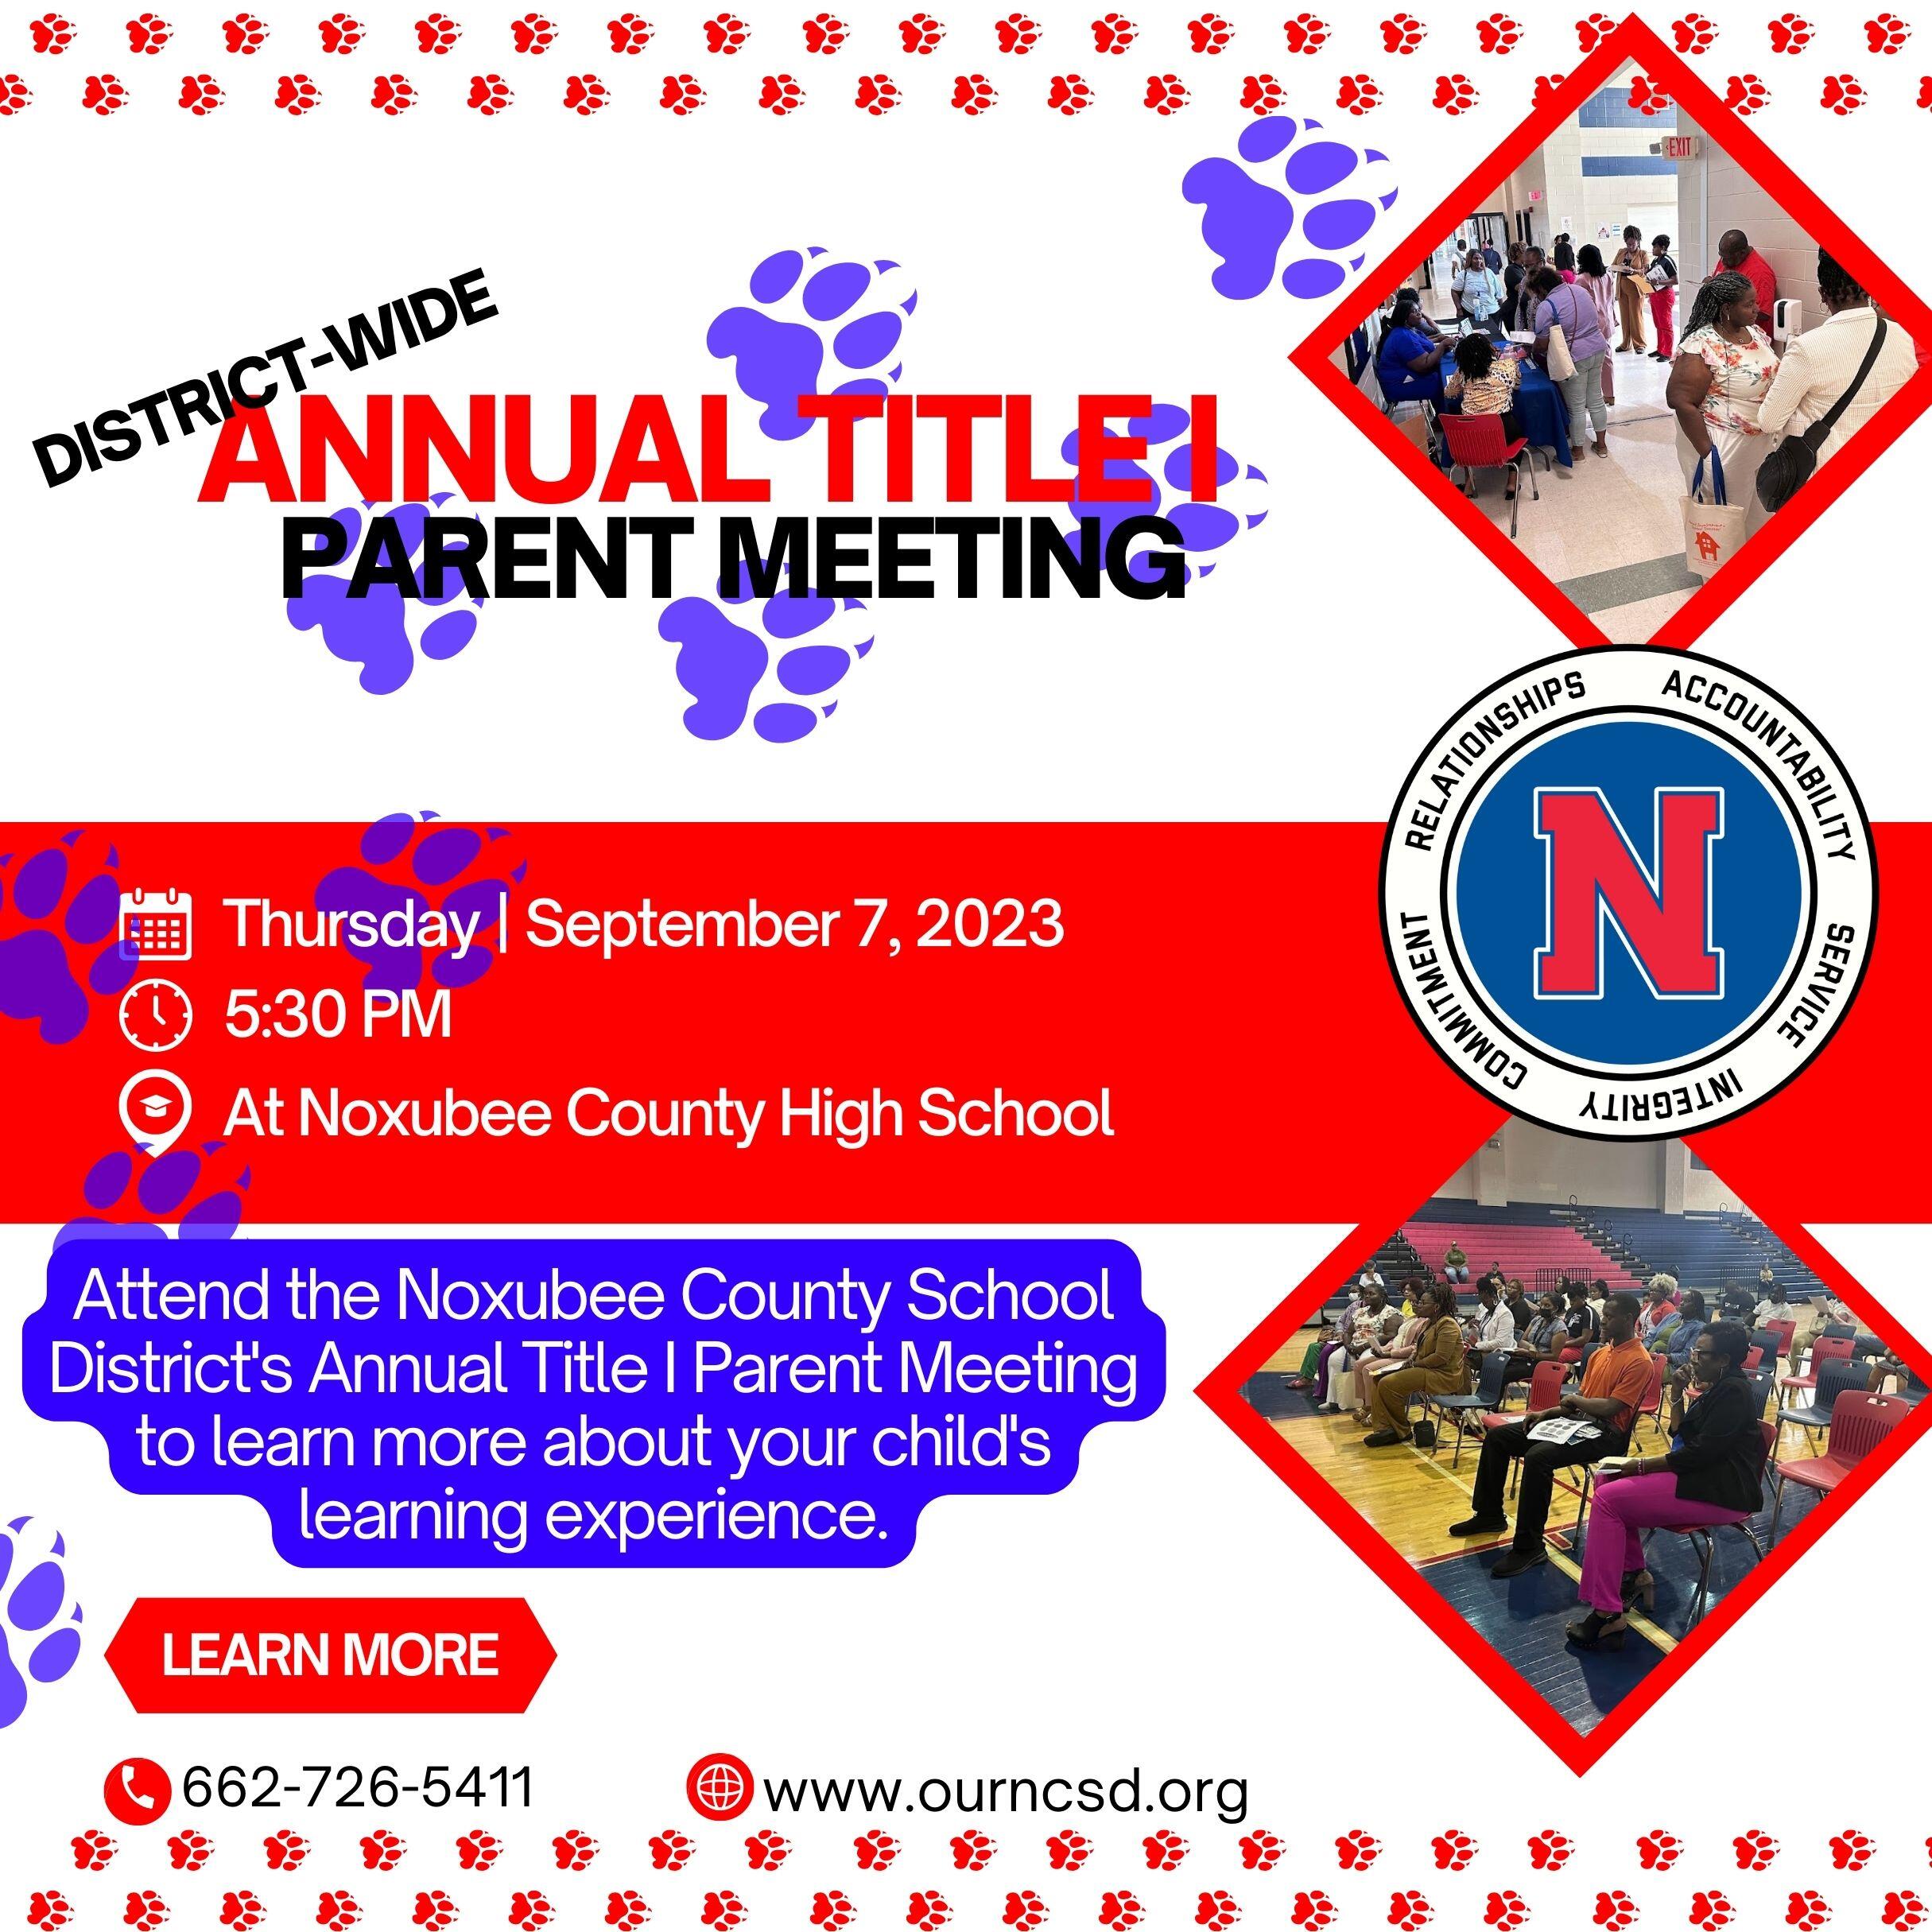 Annual Title I Parent Meeting - 9/7/23